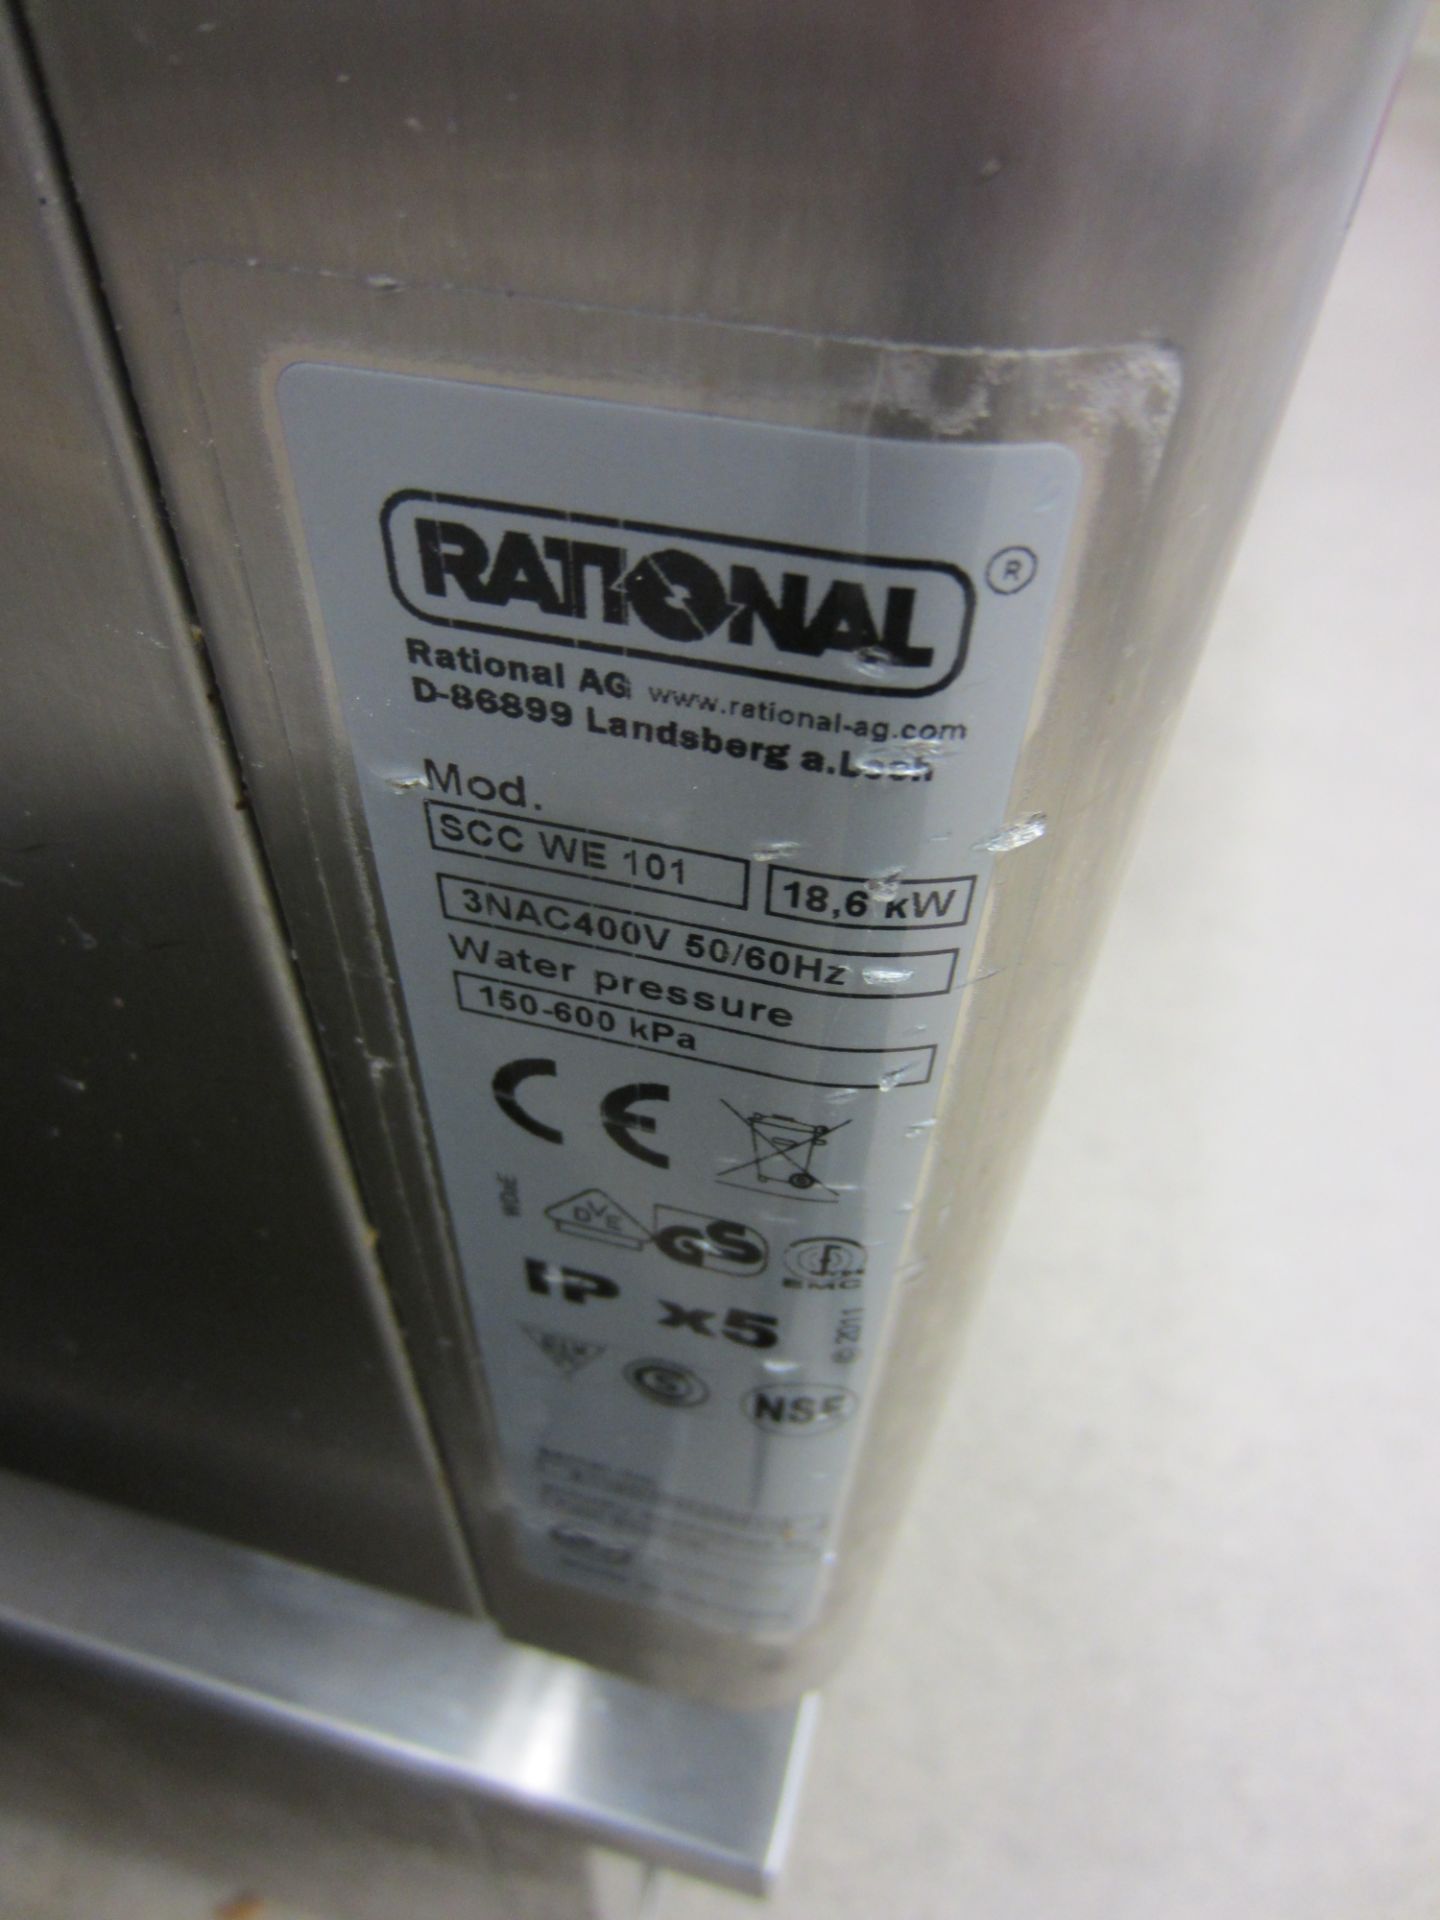 Rational Combi Oven SCC-WE 101, Very Good Condition - Image 3 of 3